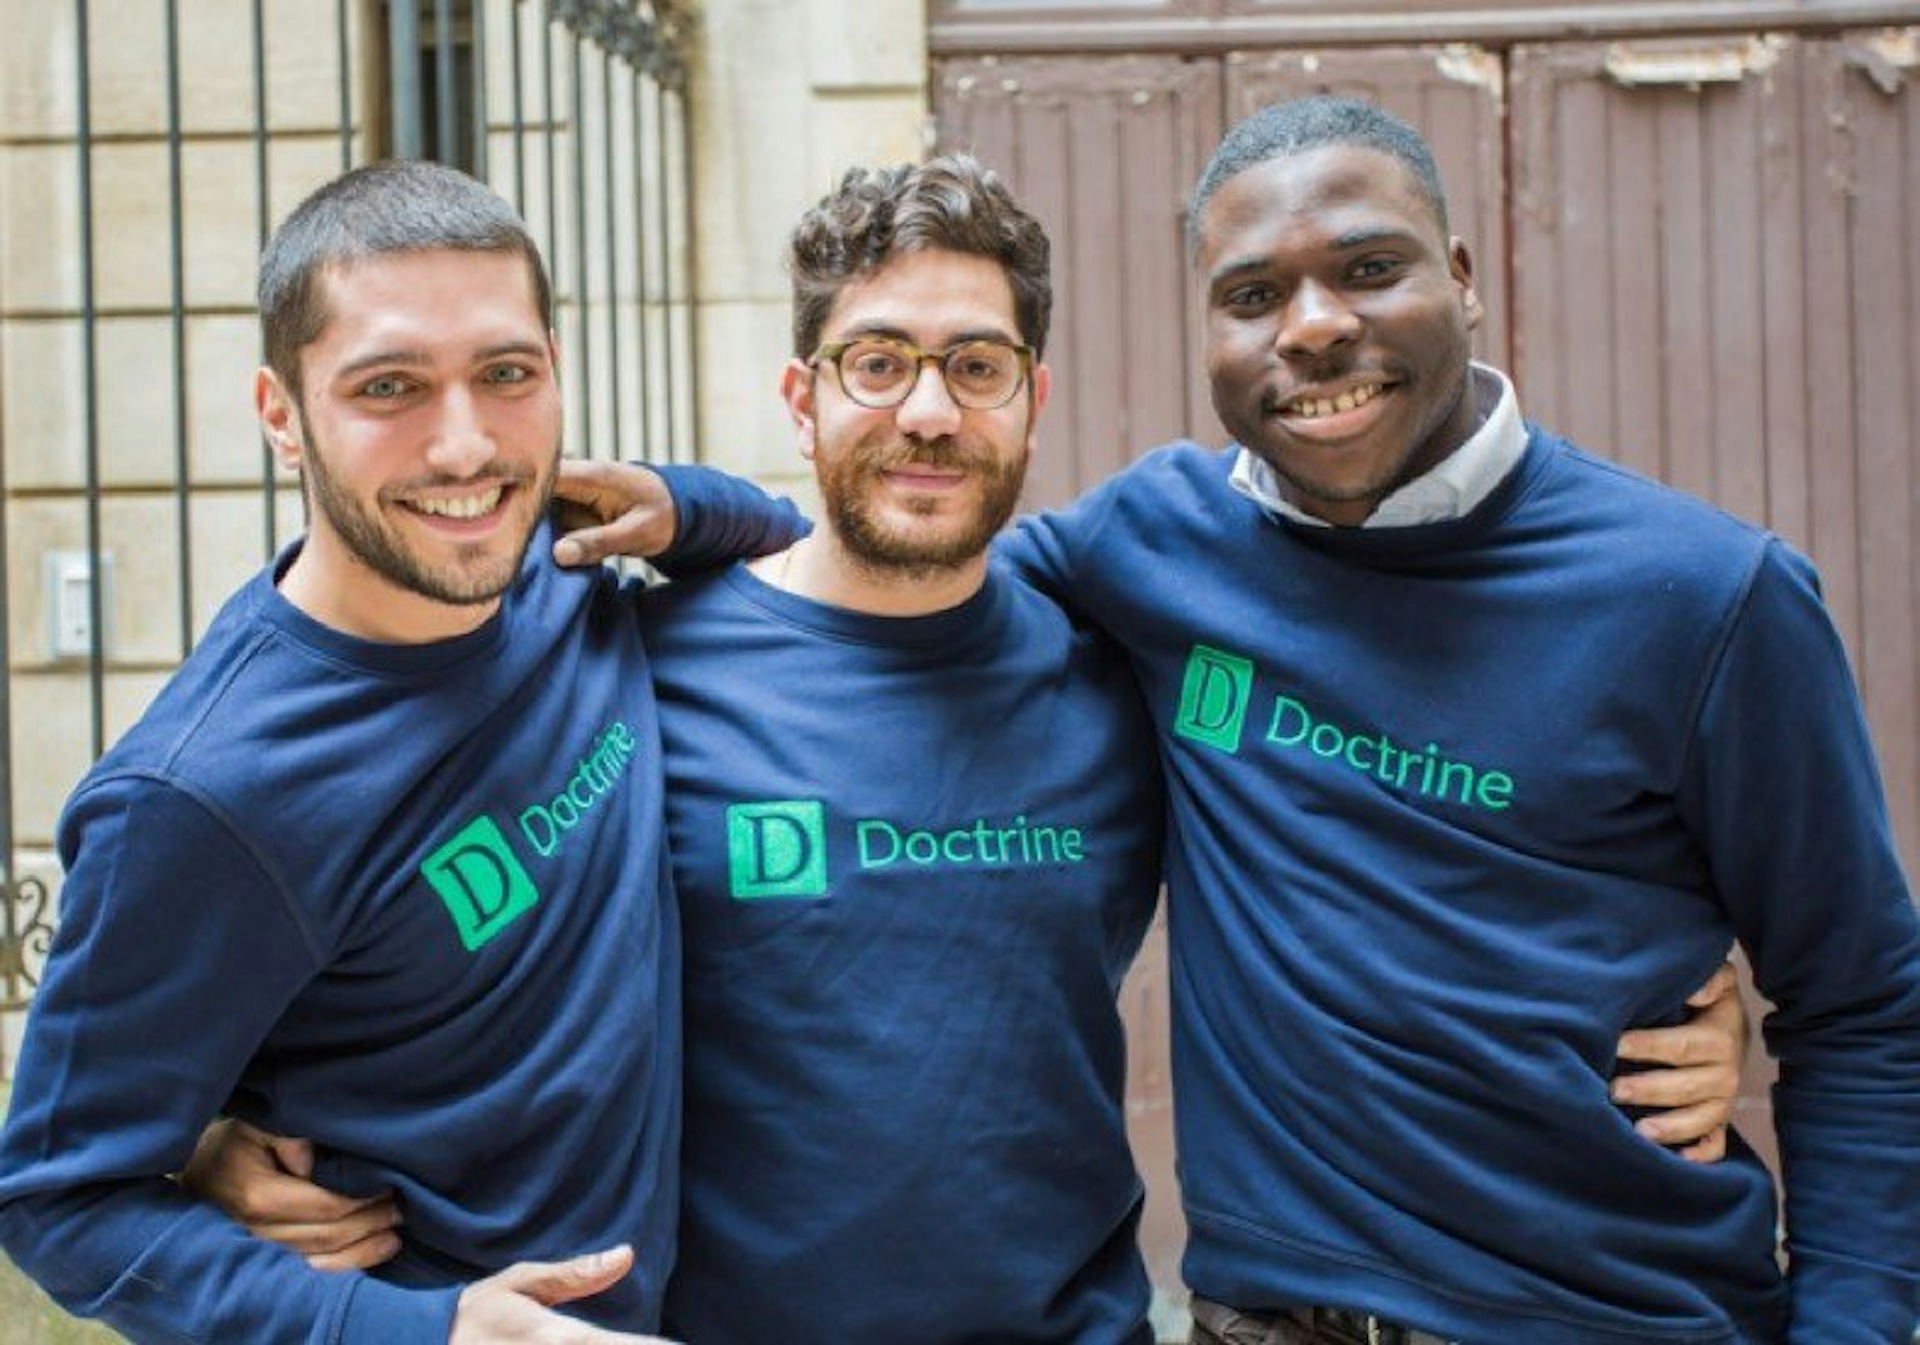 Startups like Doctrine, the new legal search engine that needed to develop its volume of leads